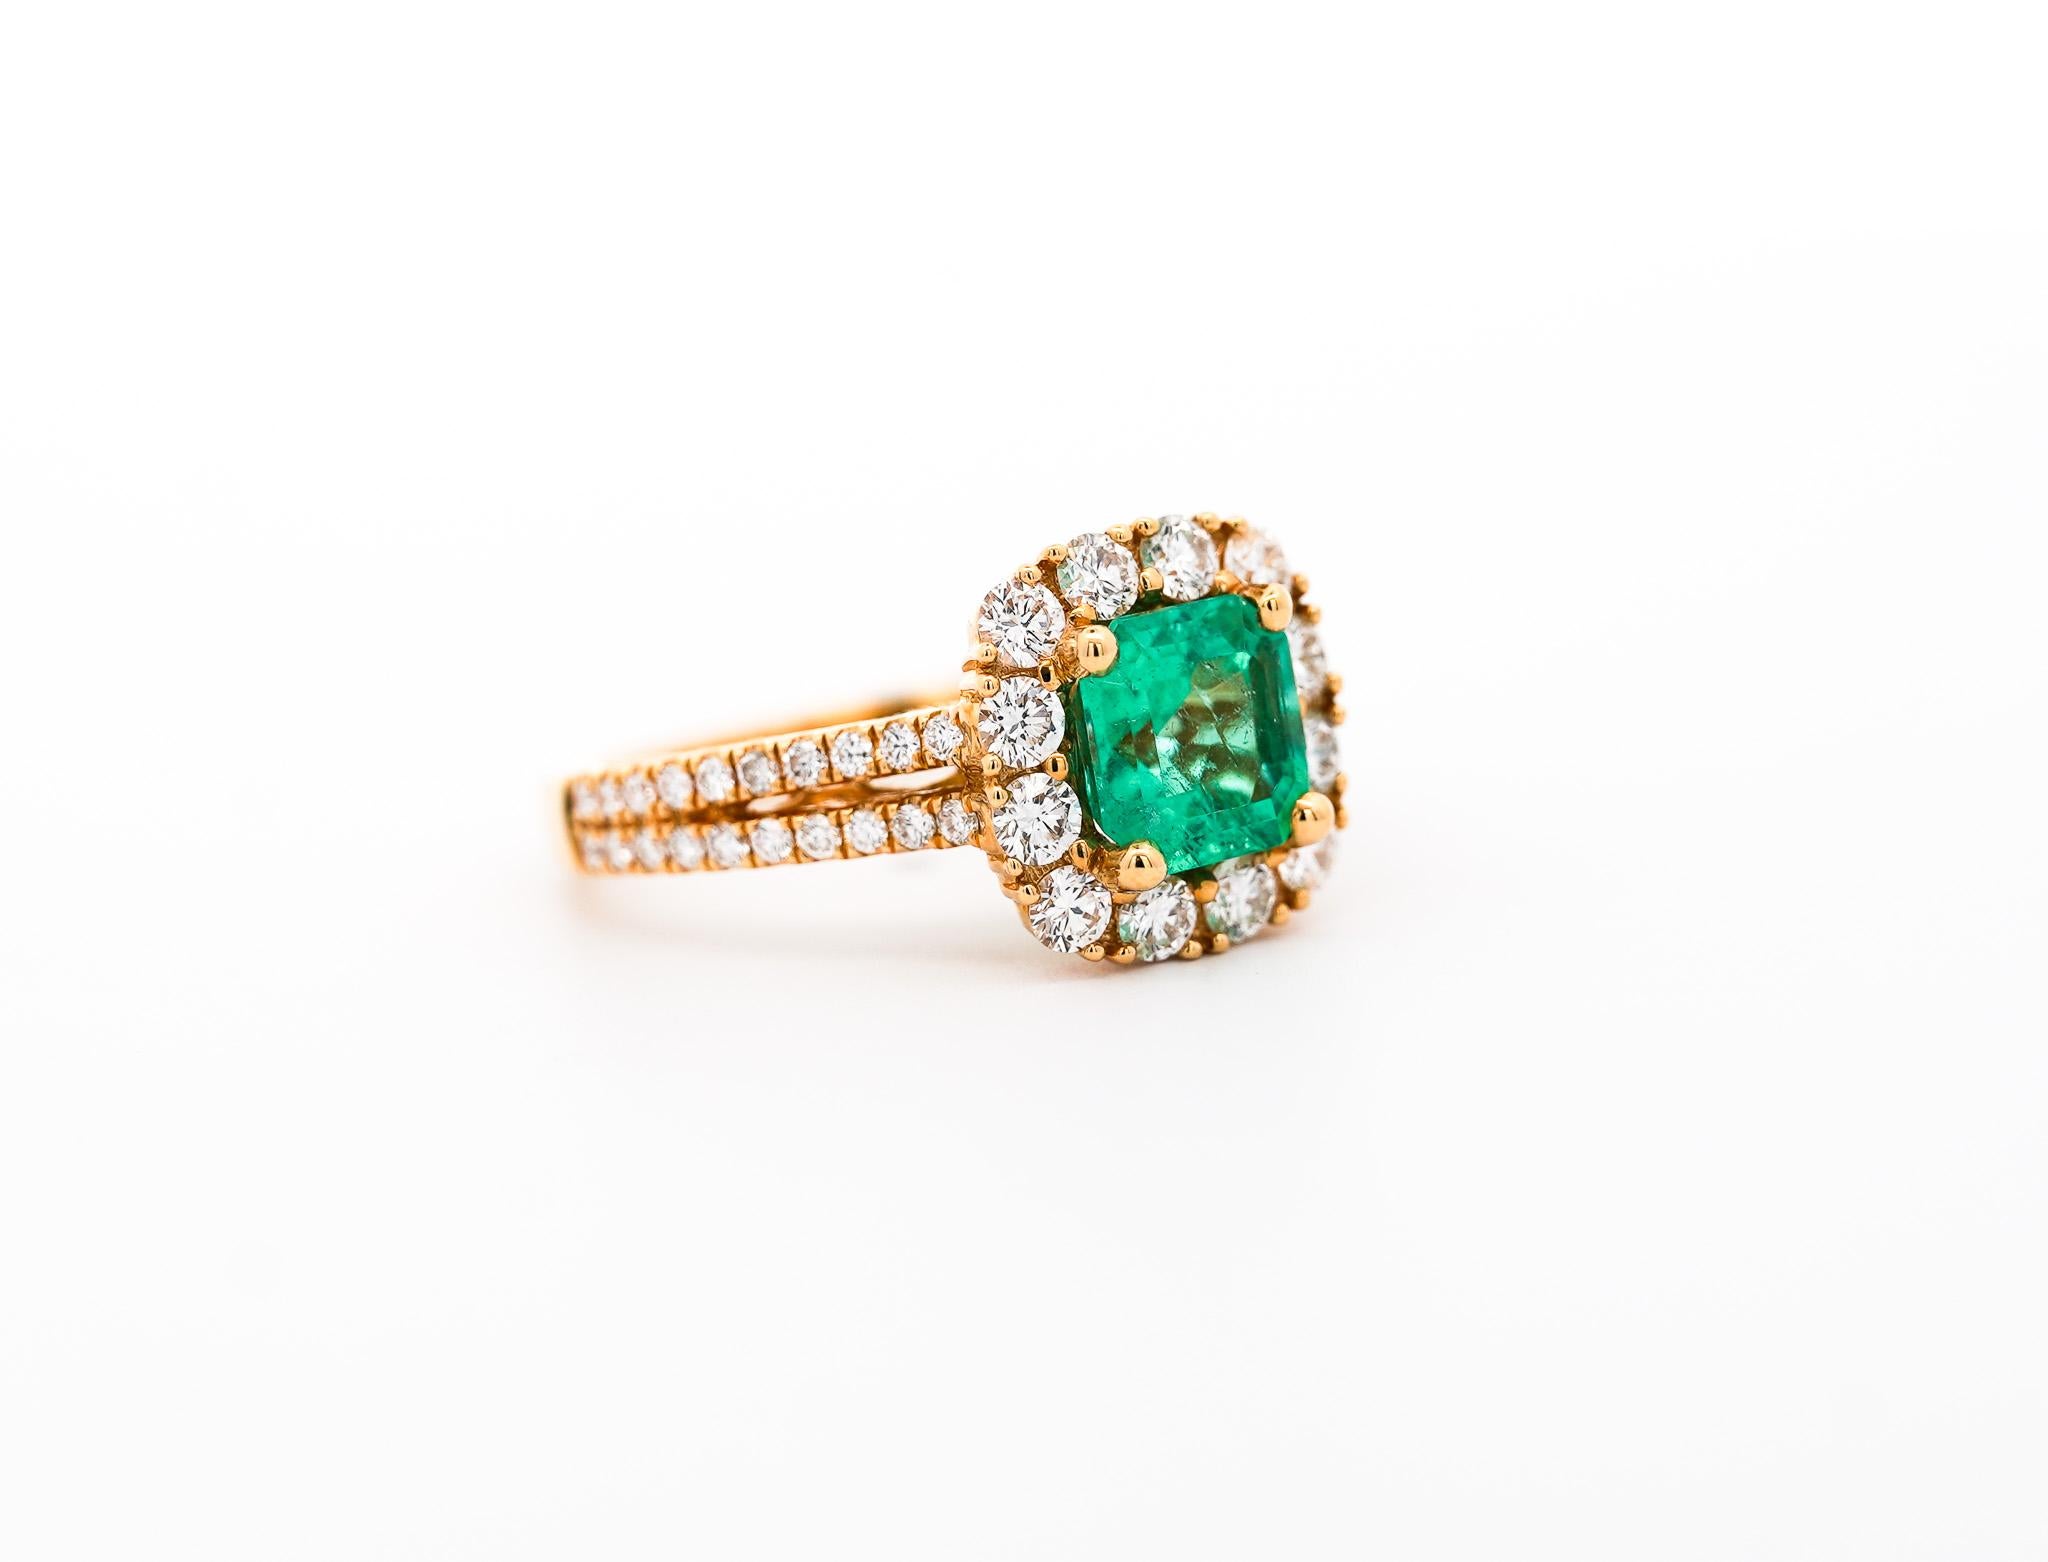 18k solid yellow gold ring, featuring a 1.49 carat natural Colombian emerald and a round cut diamond halo and double row ring shank. Set with an open back to allow the emerald natural color to be on full display. The emerald center stone bears